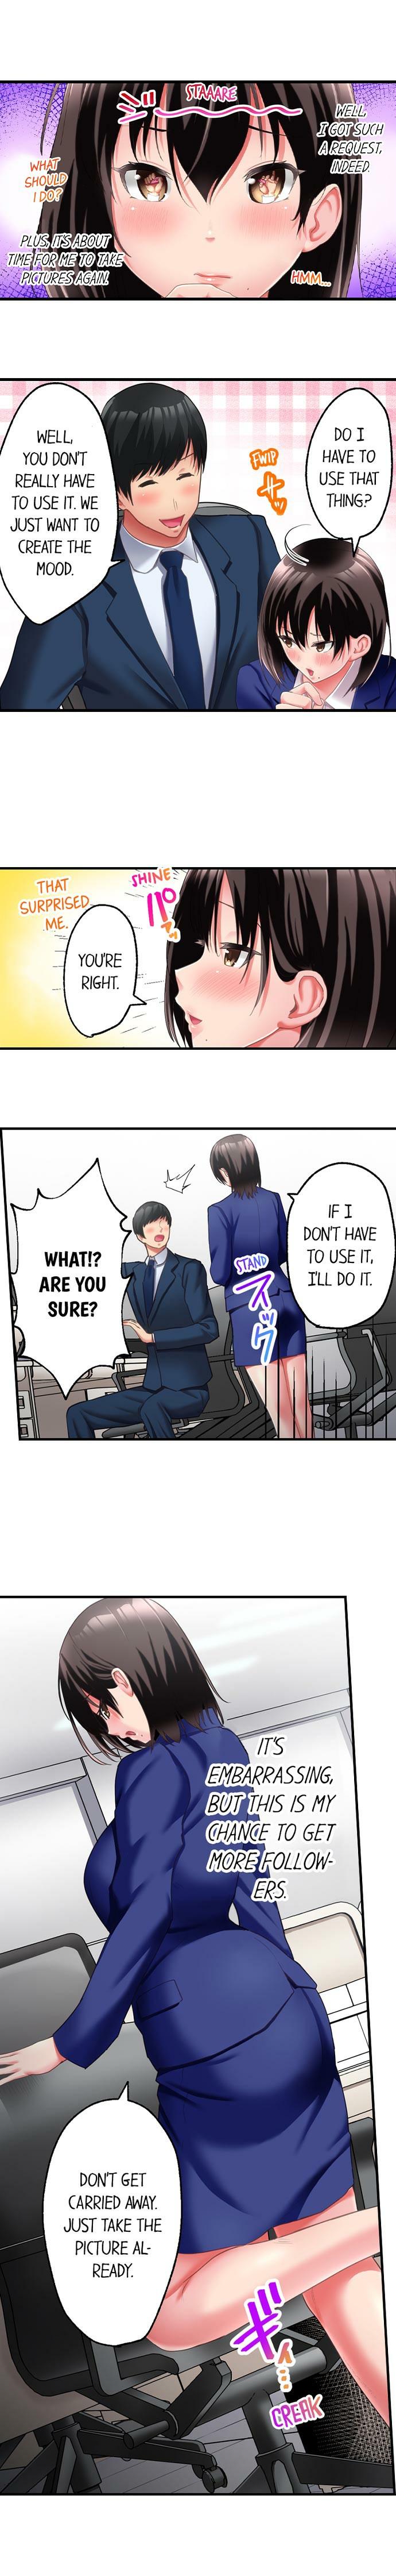 [Kayanoi Ino] Busted by my Co-Worker 18/18 [English] Completed